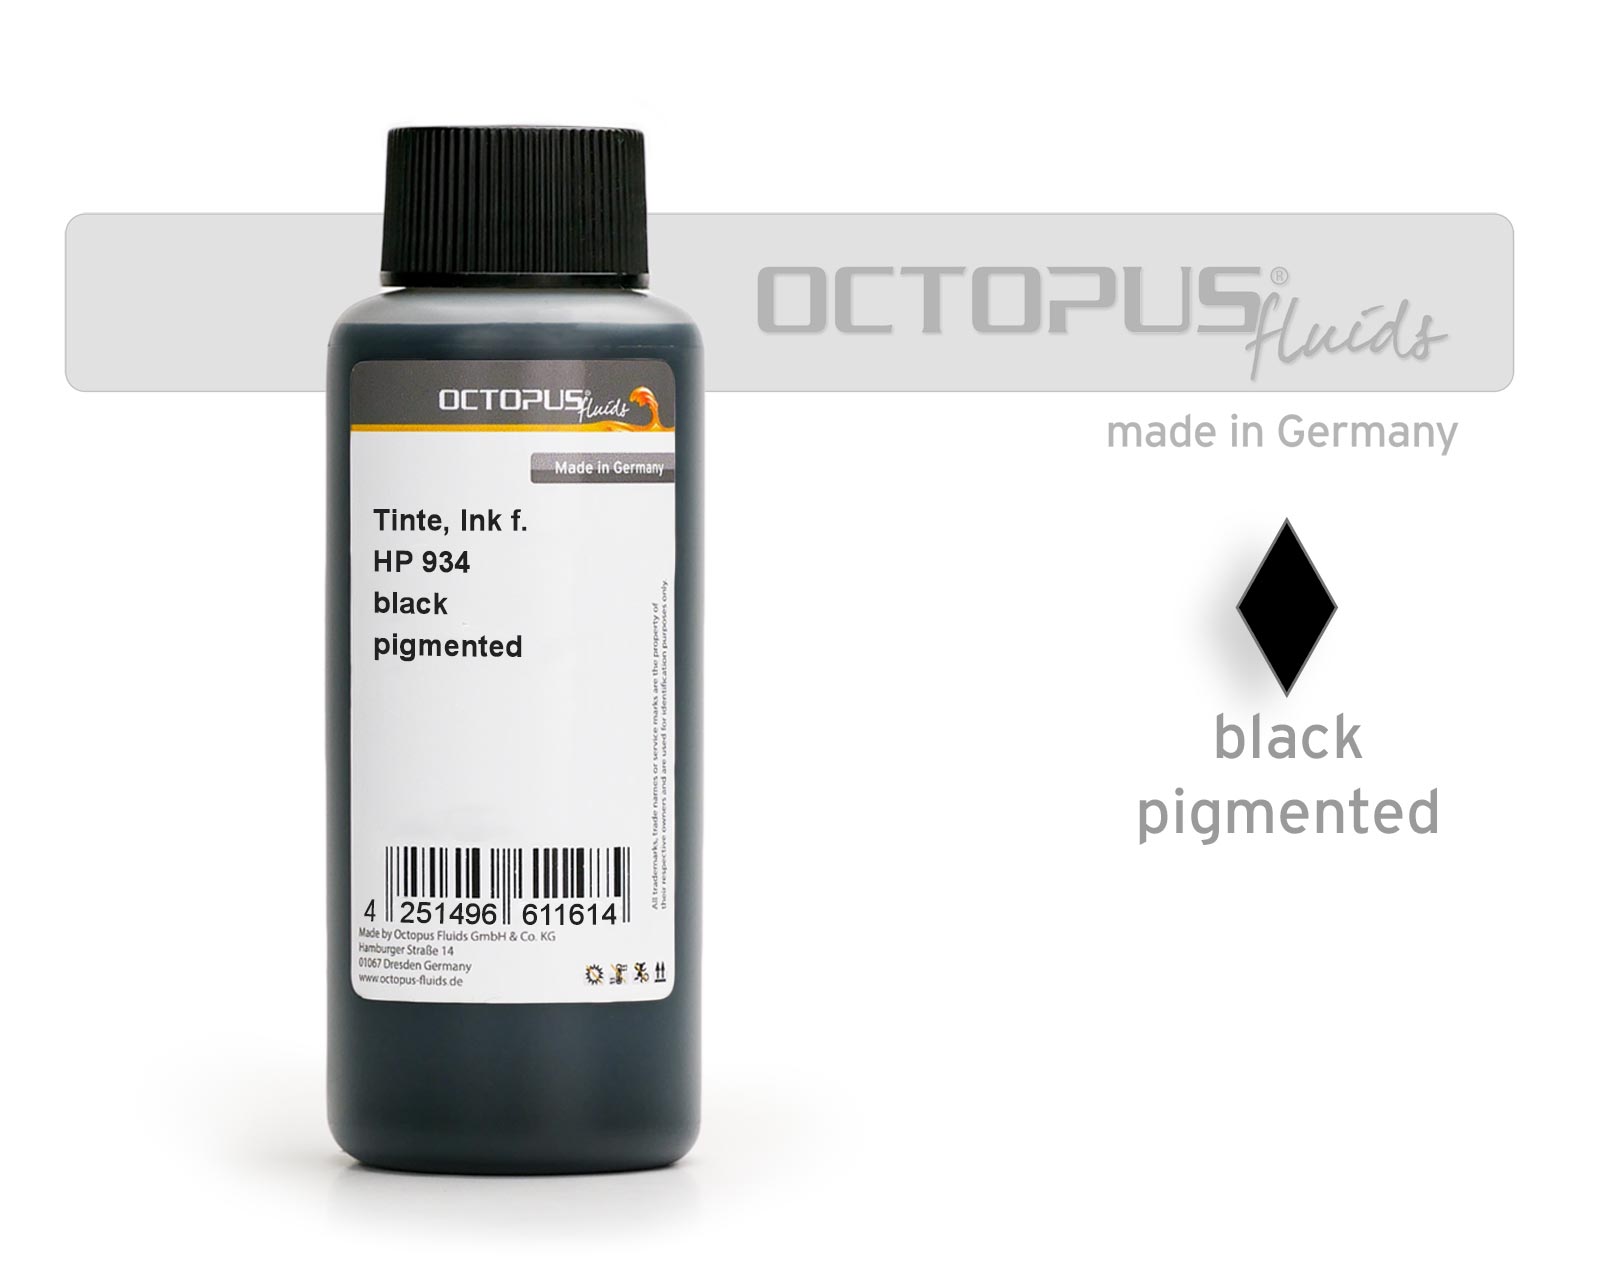 Refill ink for HP 934 cartridges black pigmented